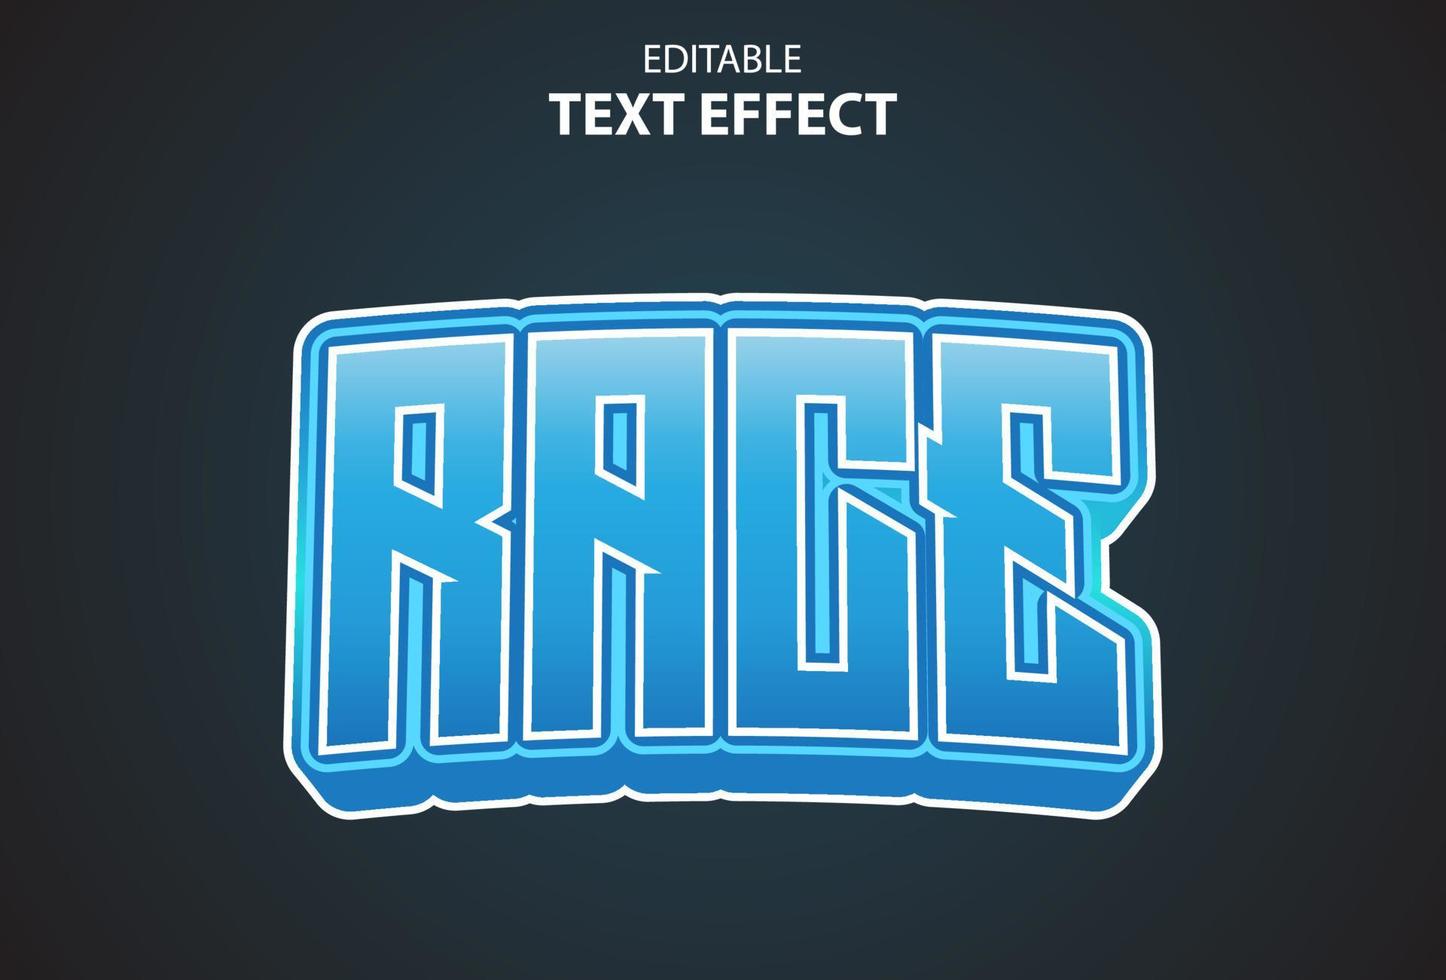 race text effect with blue color editable. vector